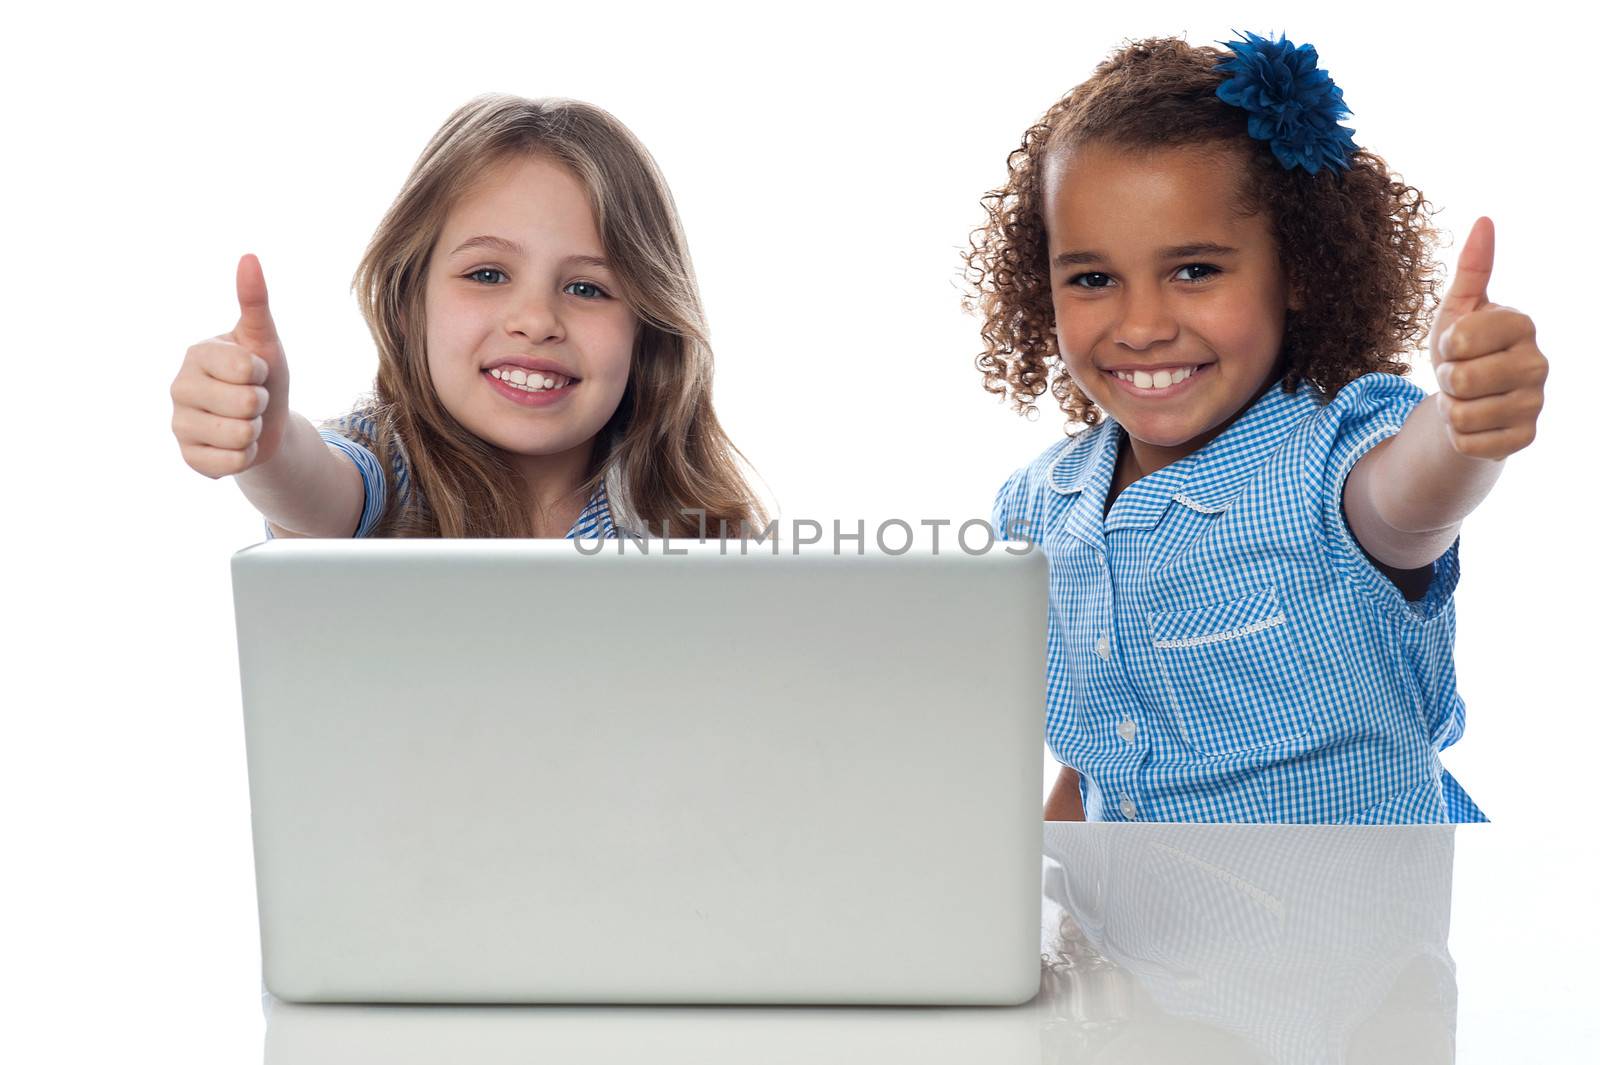 School kids with laptop gesturing thumbs up